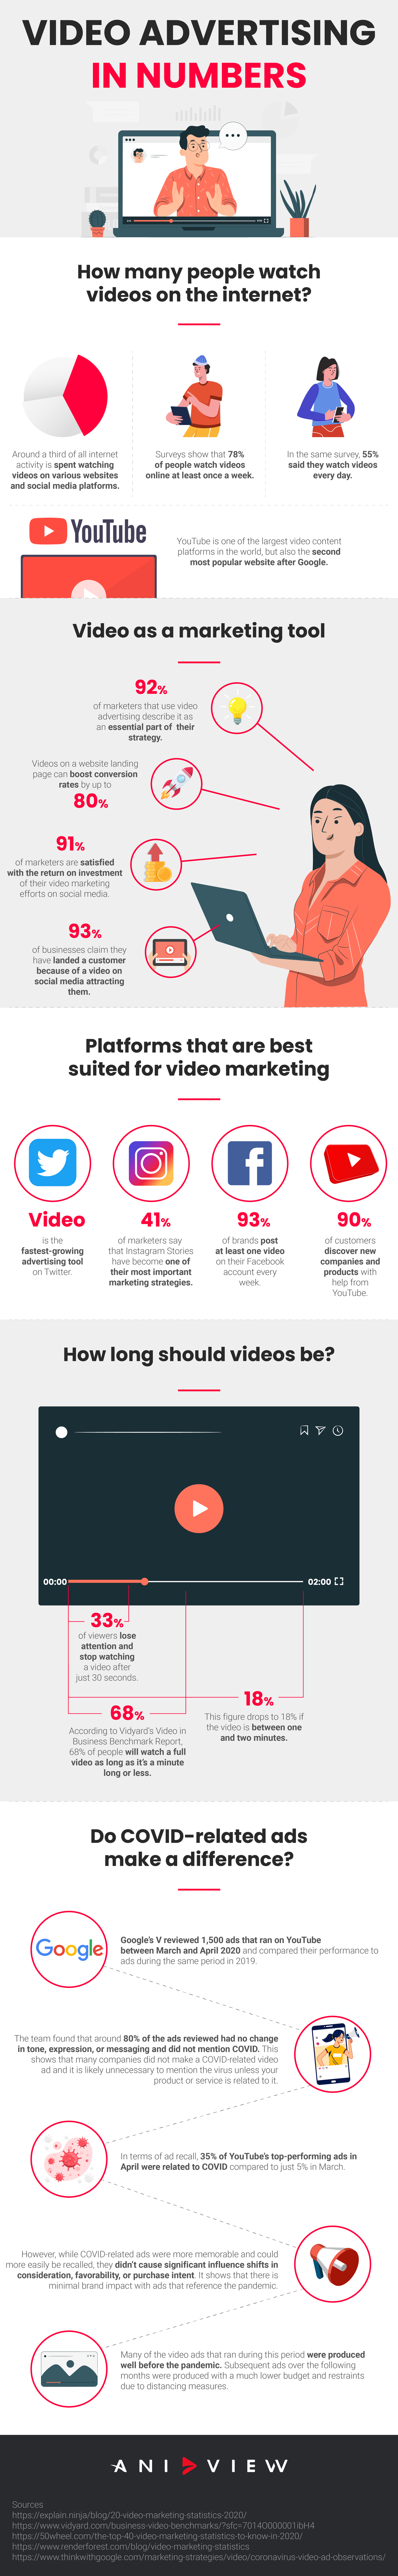 Infographic: Video Advertising in Numbers